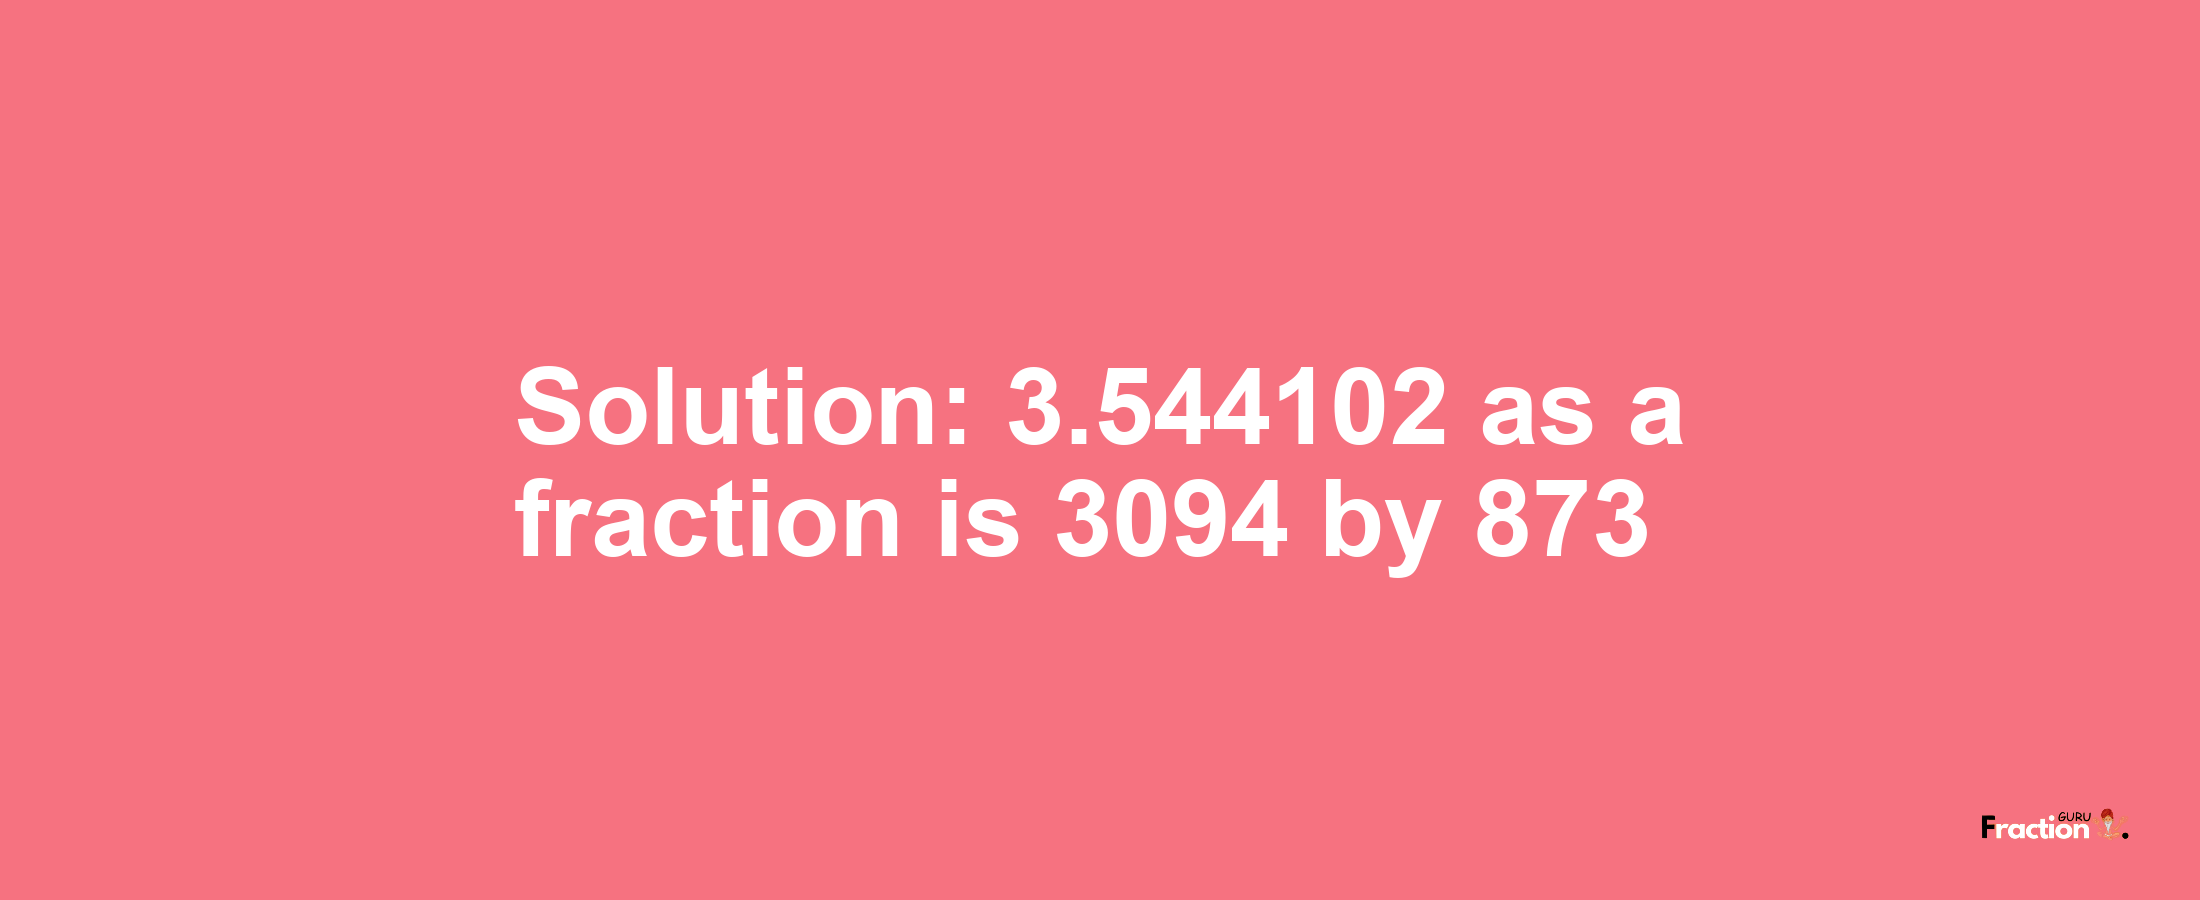 Solution:3.544102 as a fraction is 3094/873